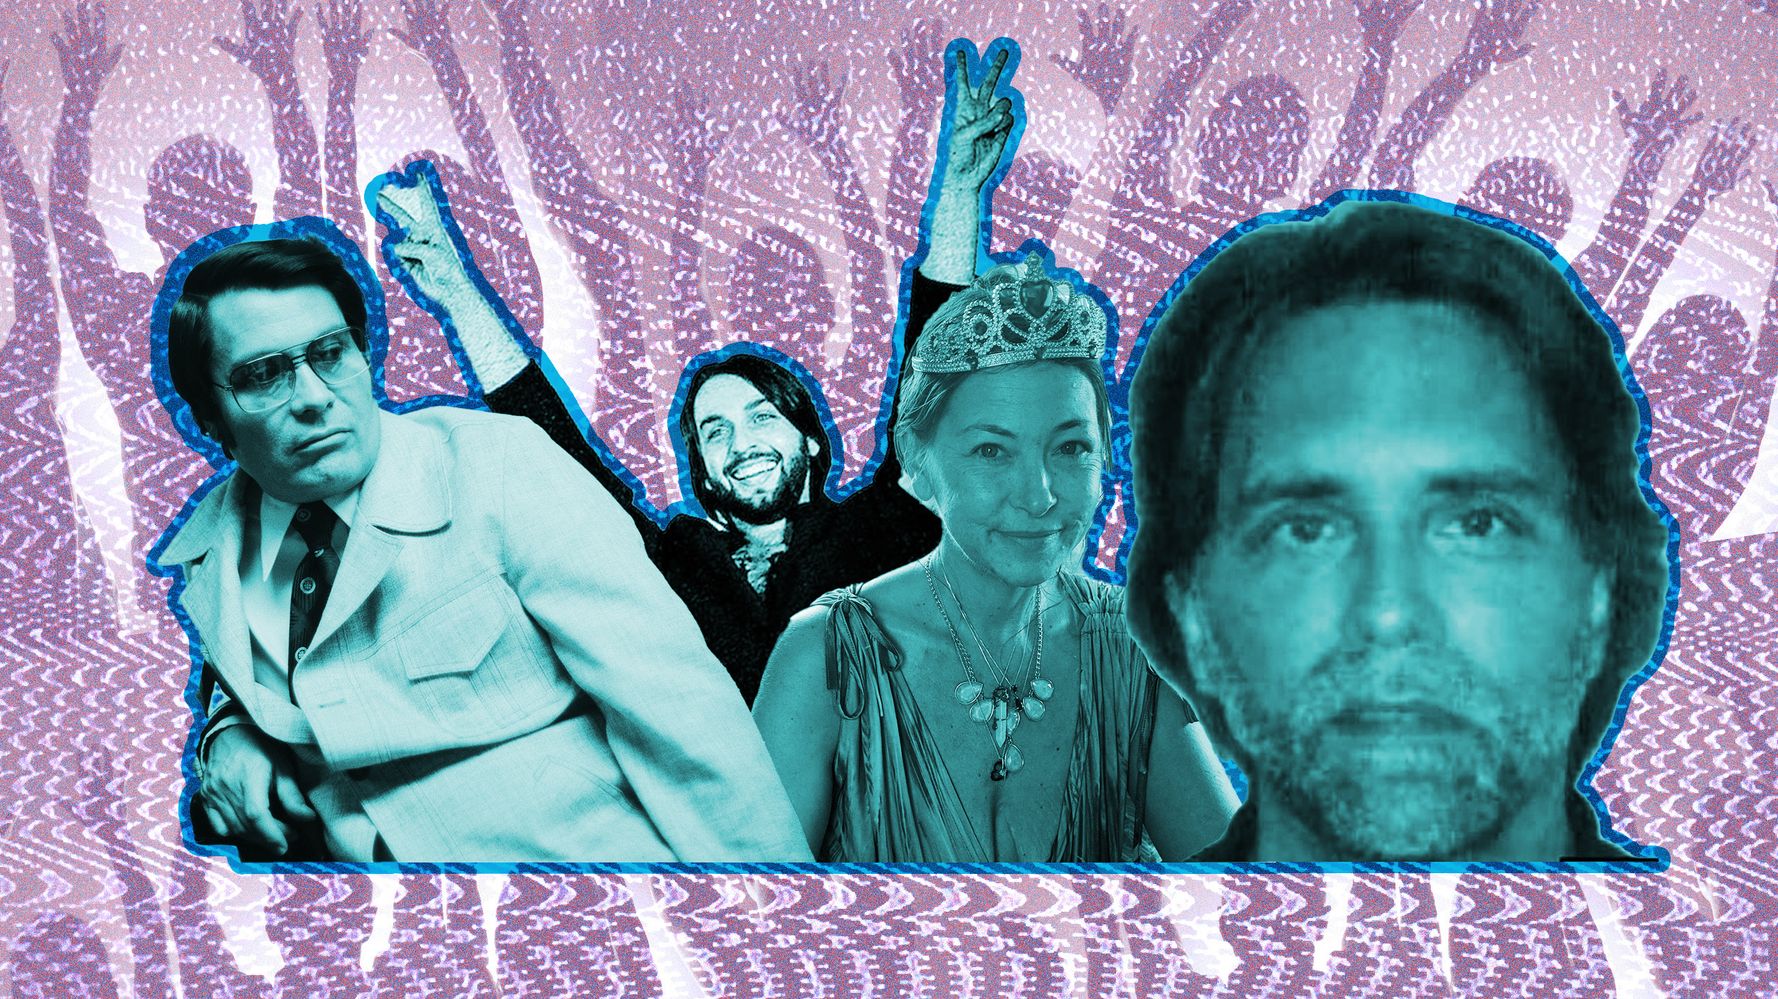 Why we're so obsessed with cults